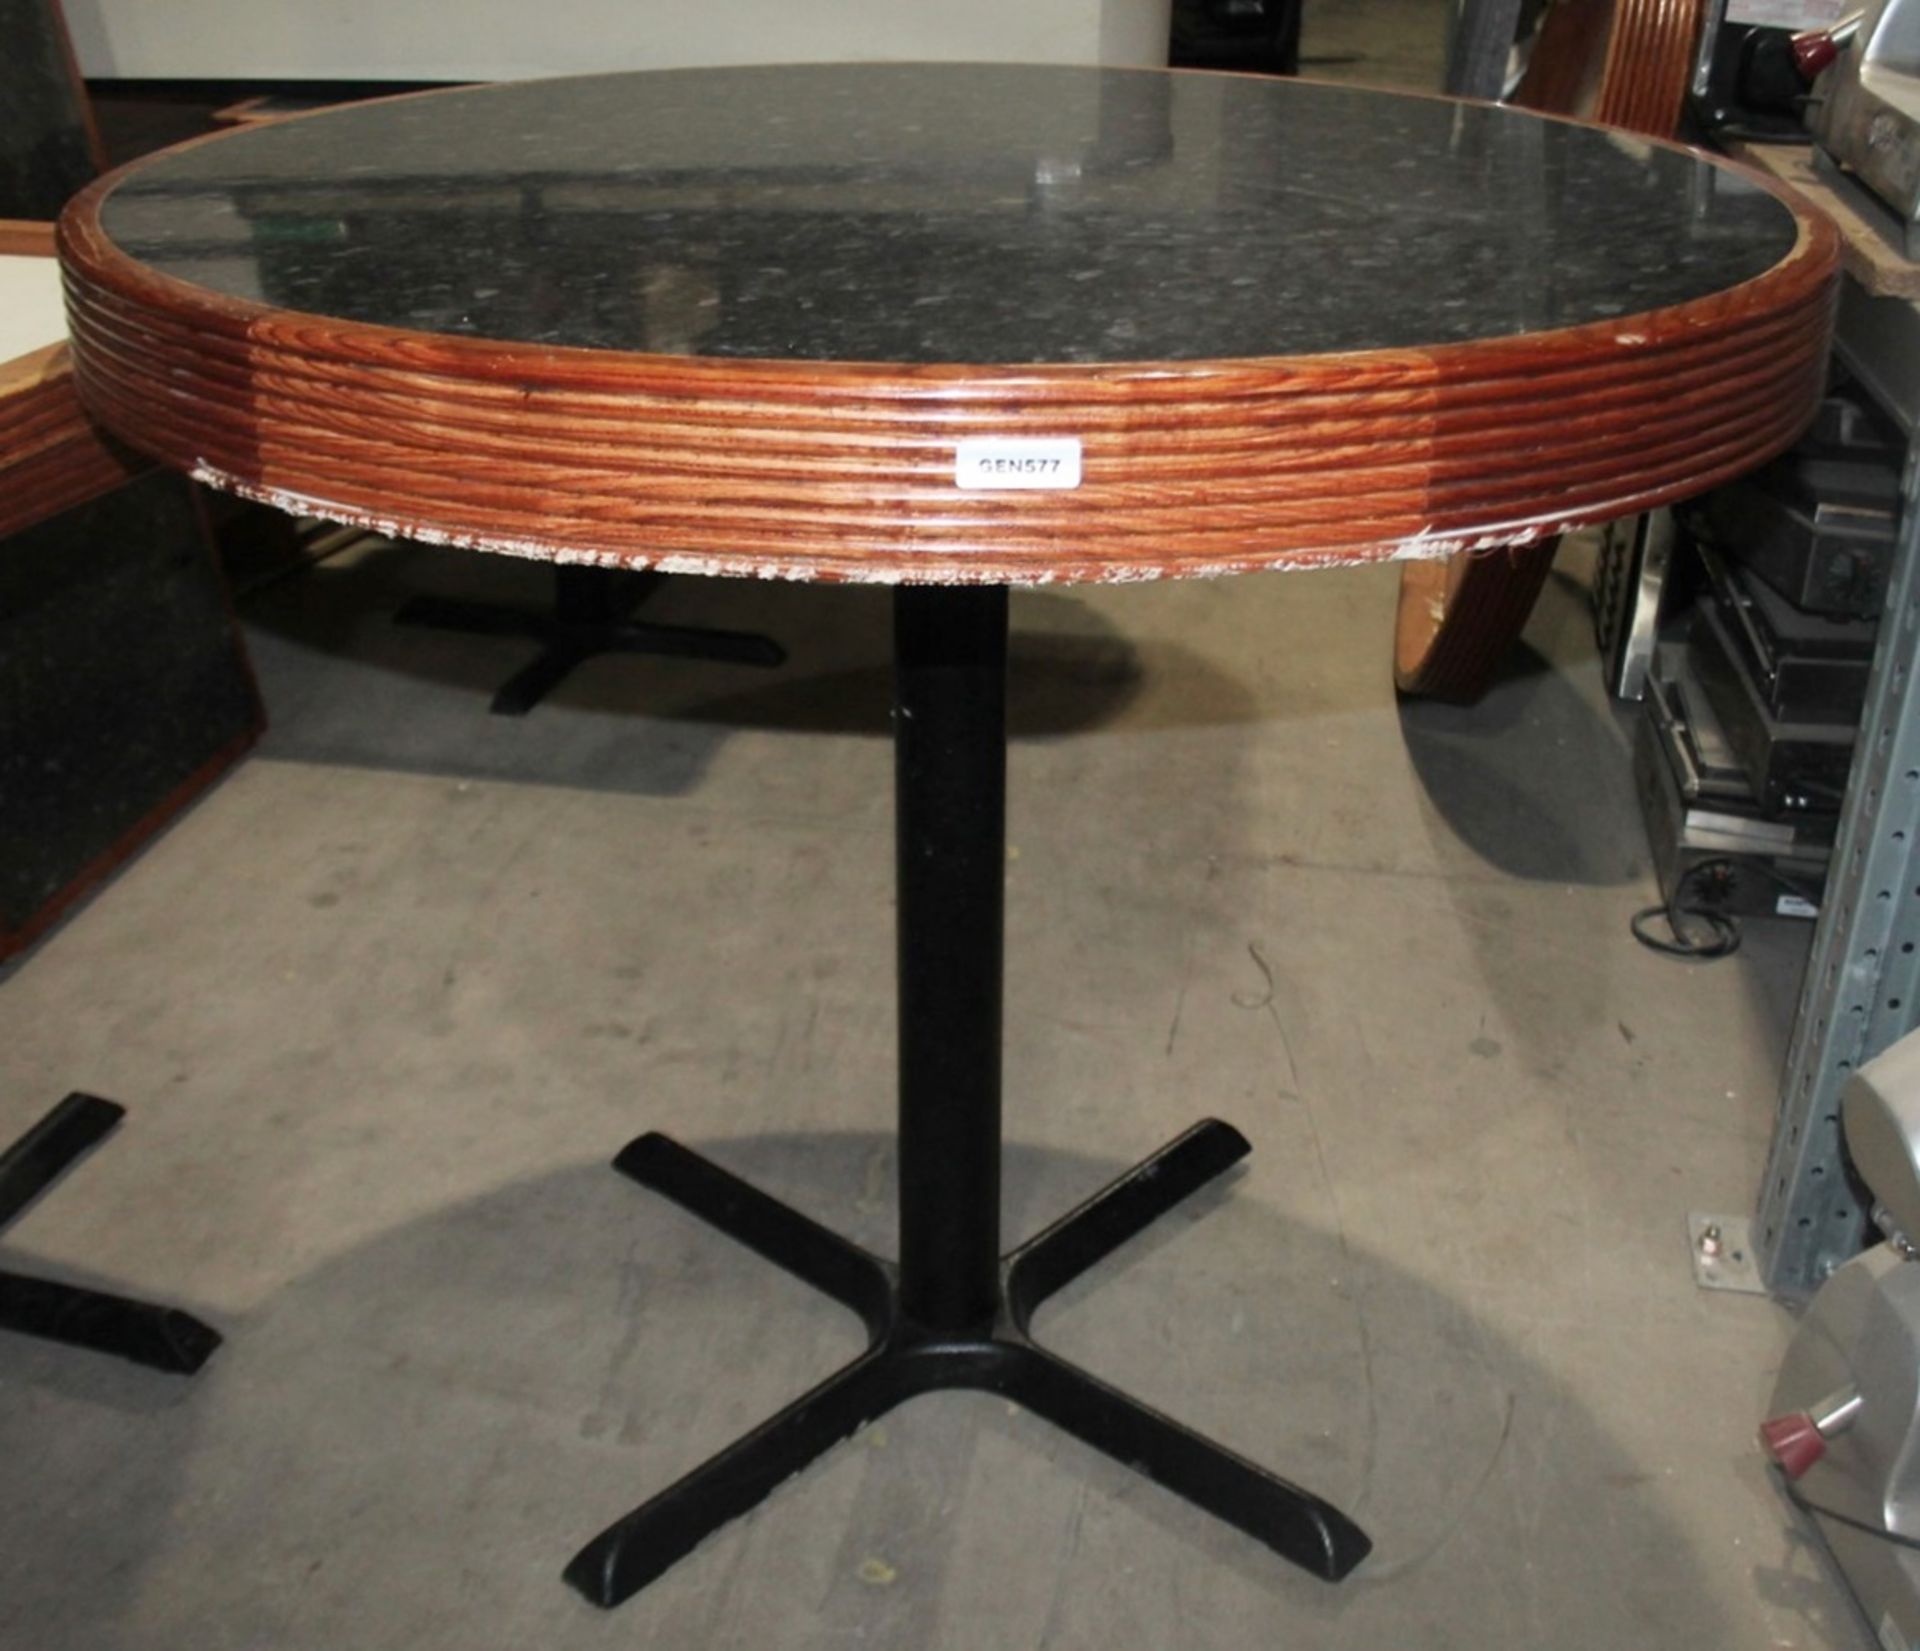 4 x Round Restaurant Dining Tables With Granite Style Surface, Wooden Edging and Cast Iron Bases - - Image 3 of 3